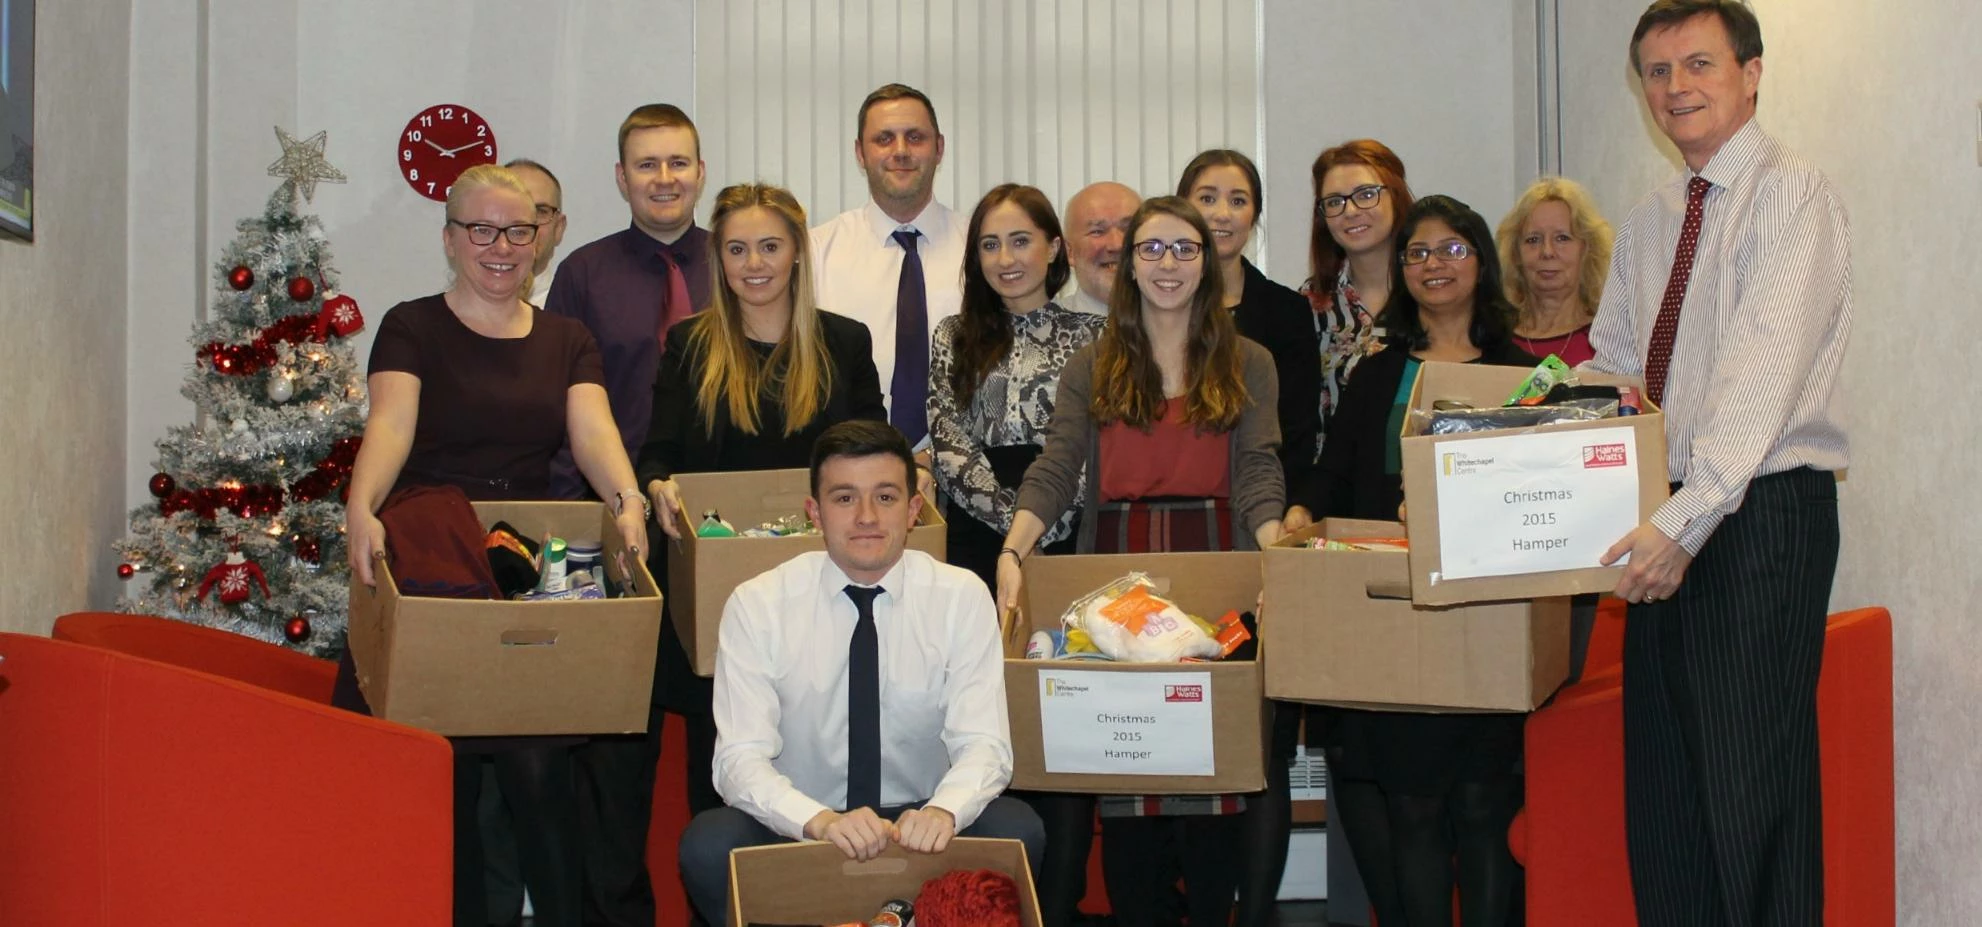 The team at Haines Watts Liverpool with their Christmas donations to The Whitechapel Centre